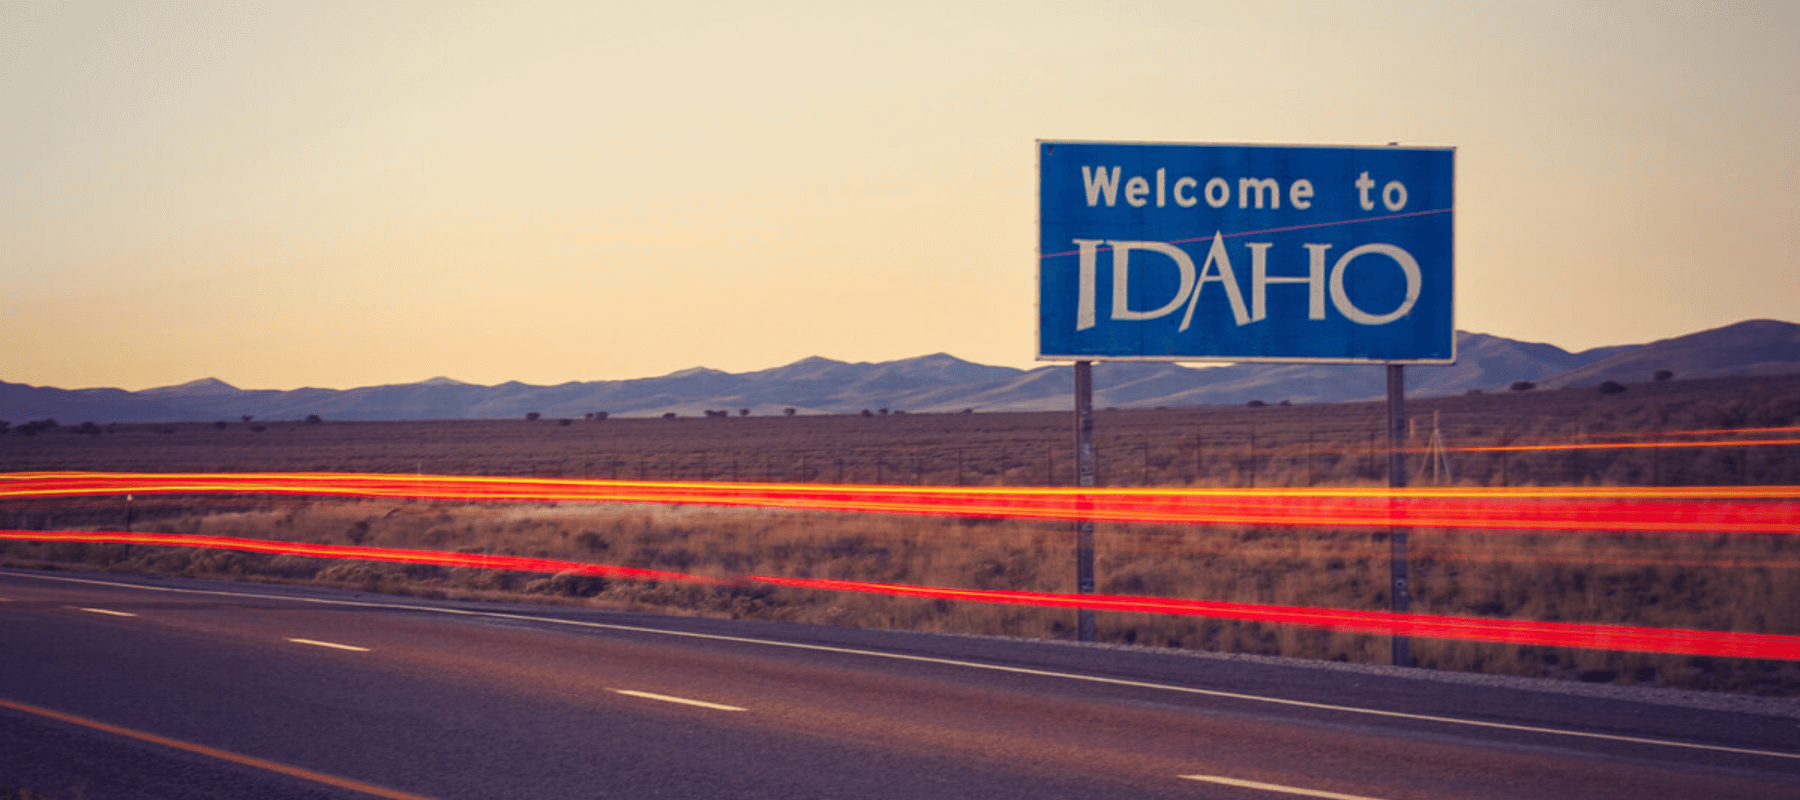 Welcome to Idaho state sign on highway at sunset